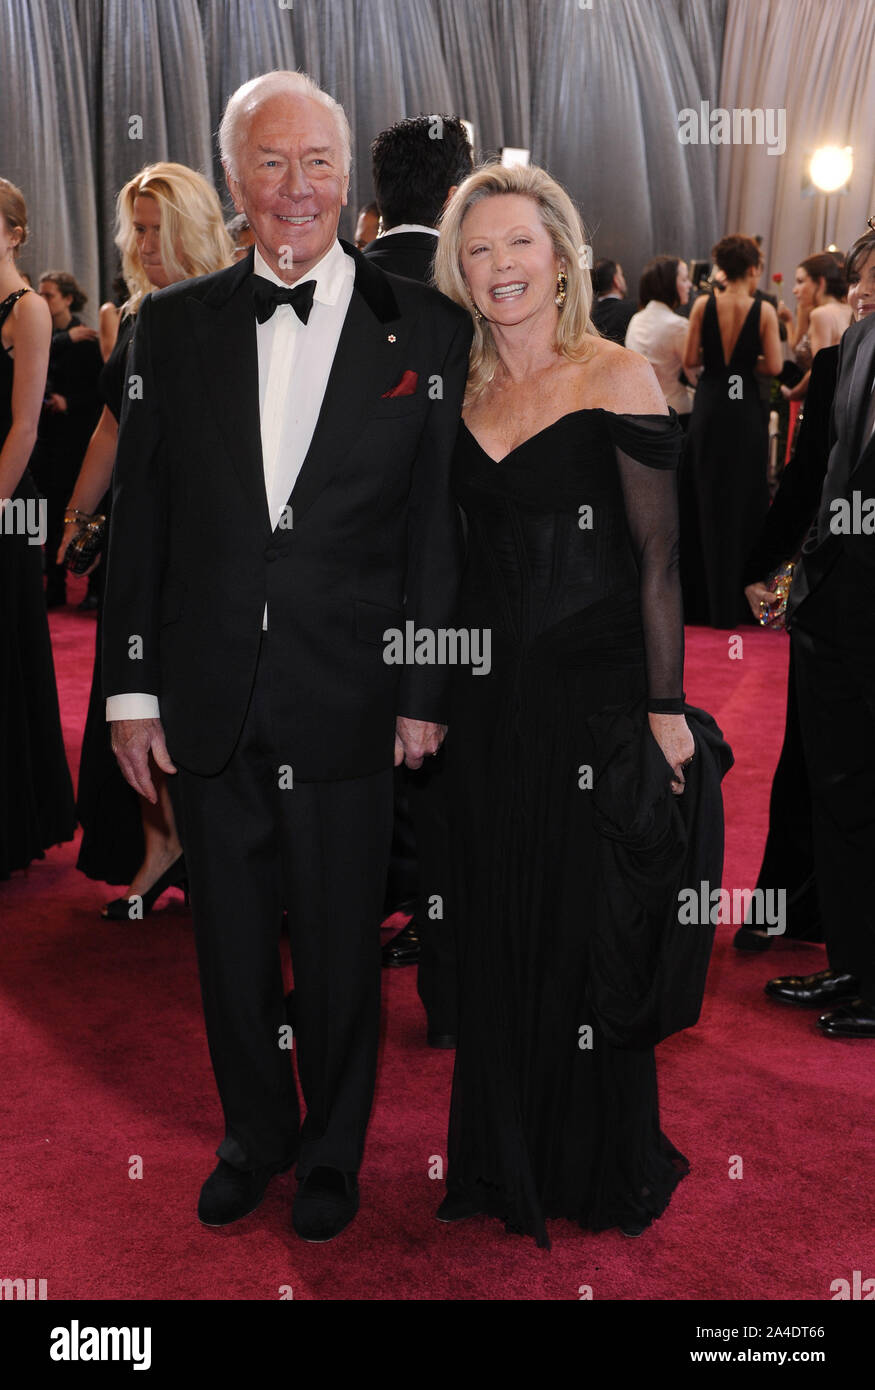 Photo Must Be Credited ©Karwai Tang/Alpha Press 076909 24/02/2013 Christopher Plummer and wife Elaine  at The 85th Academy Awards Oscars 2013 held at The Dolby Theatre Hollywood Blvd Los Angeles California Stock Photo